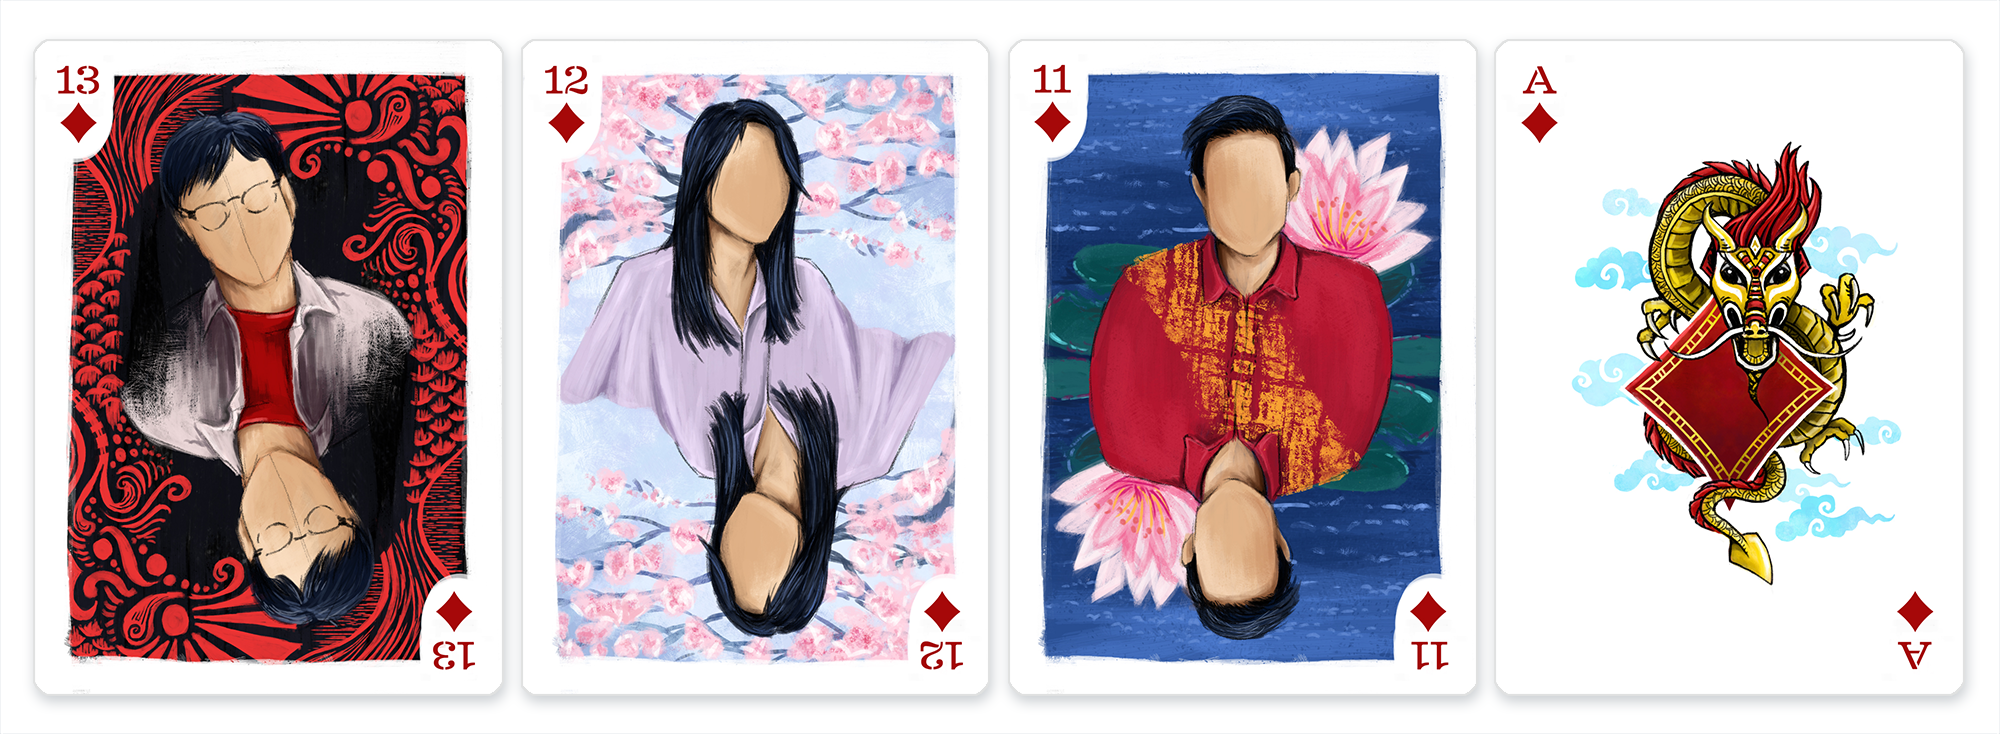 4 cards in Asian-Pacific Islander Suit 